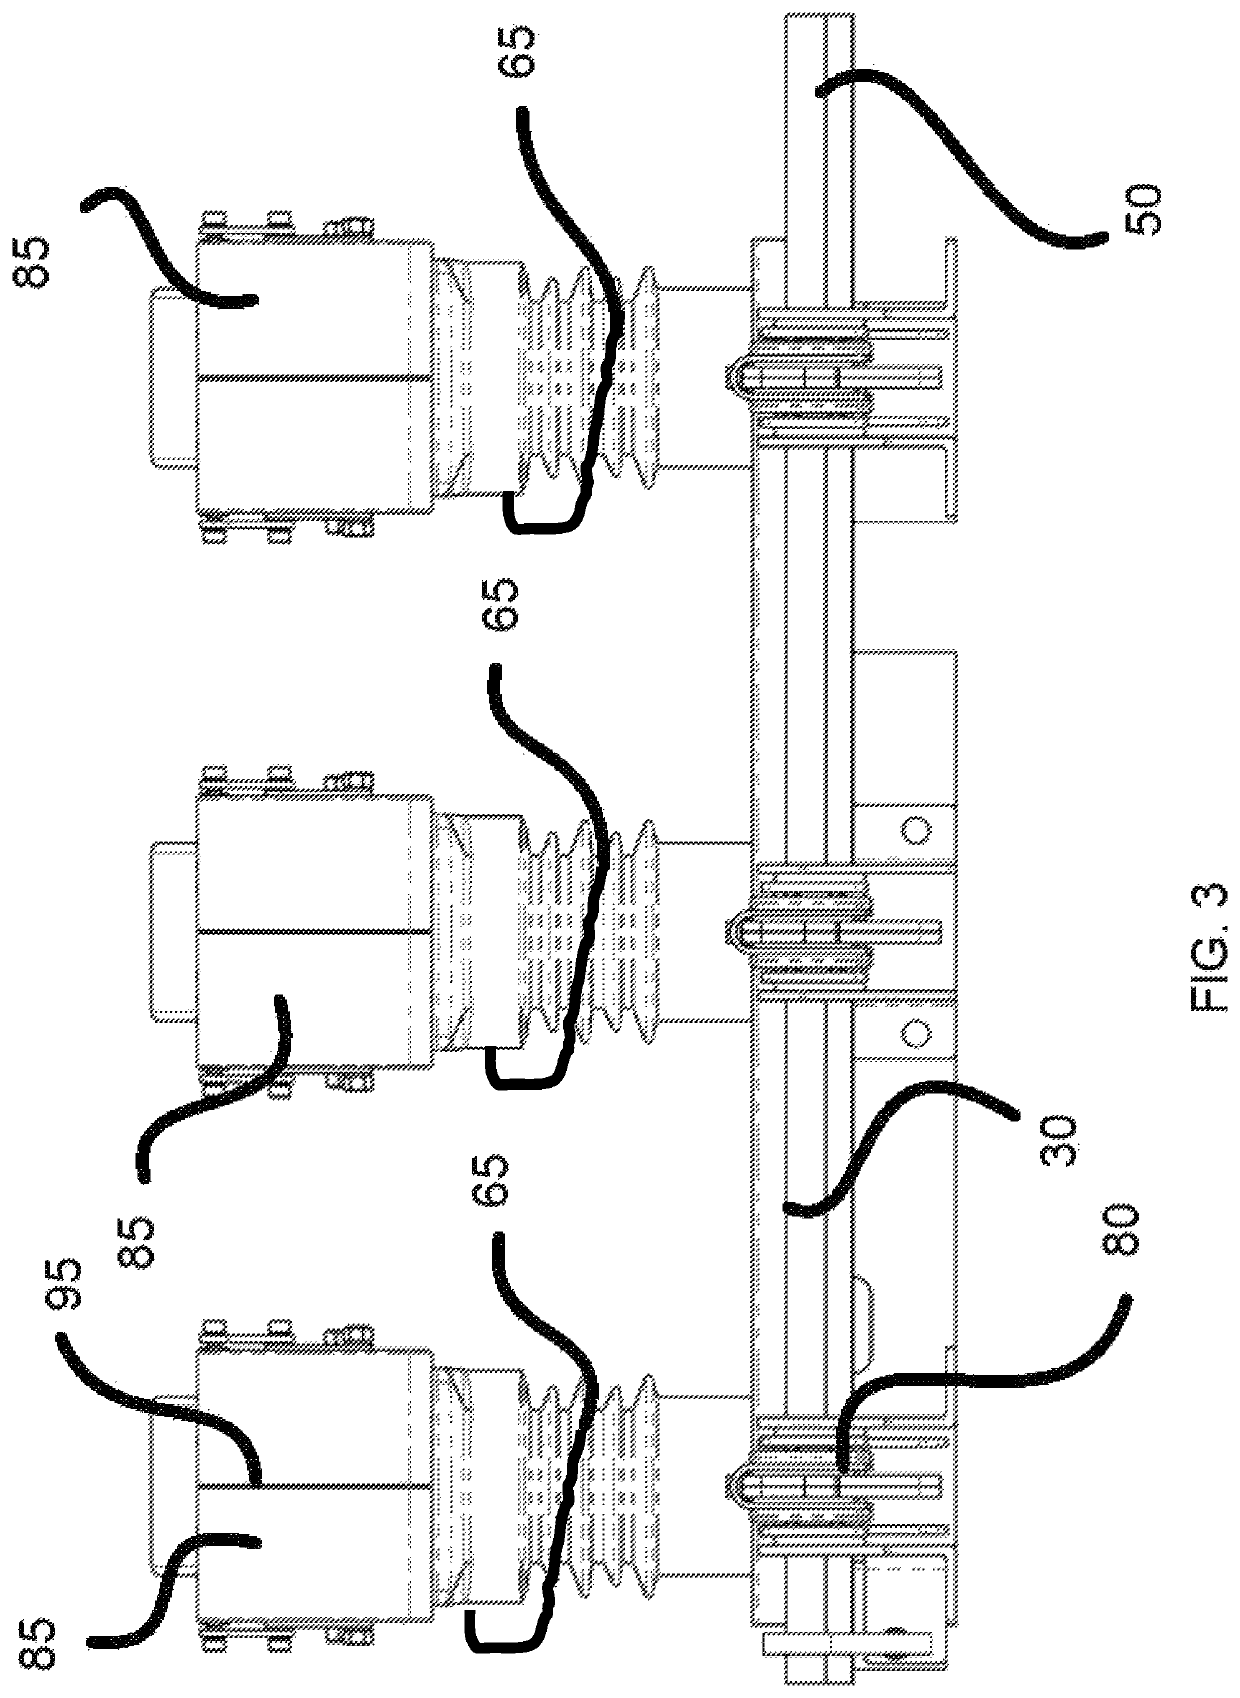 Grounding switch for use in metal-clad switchgear